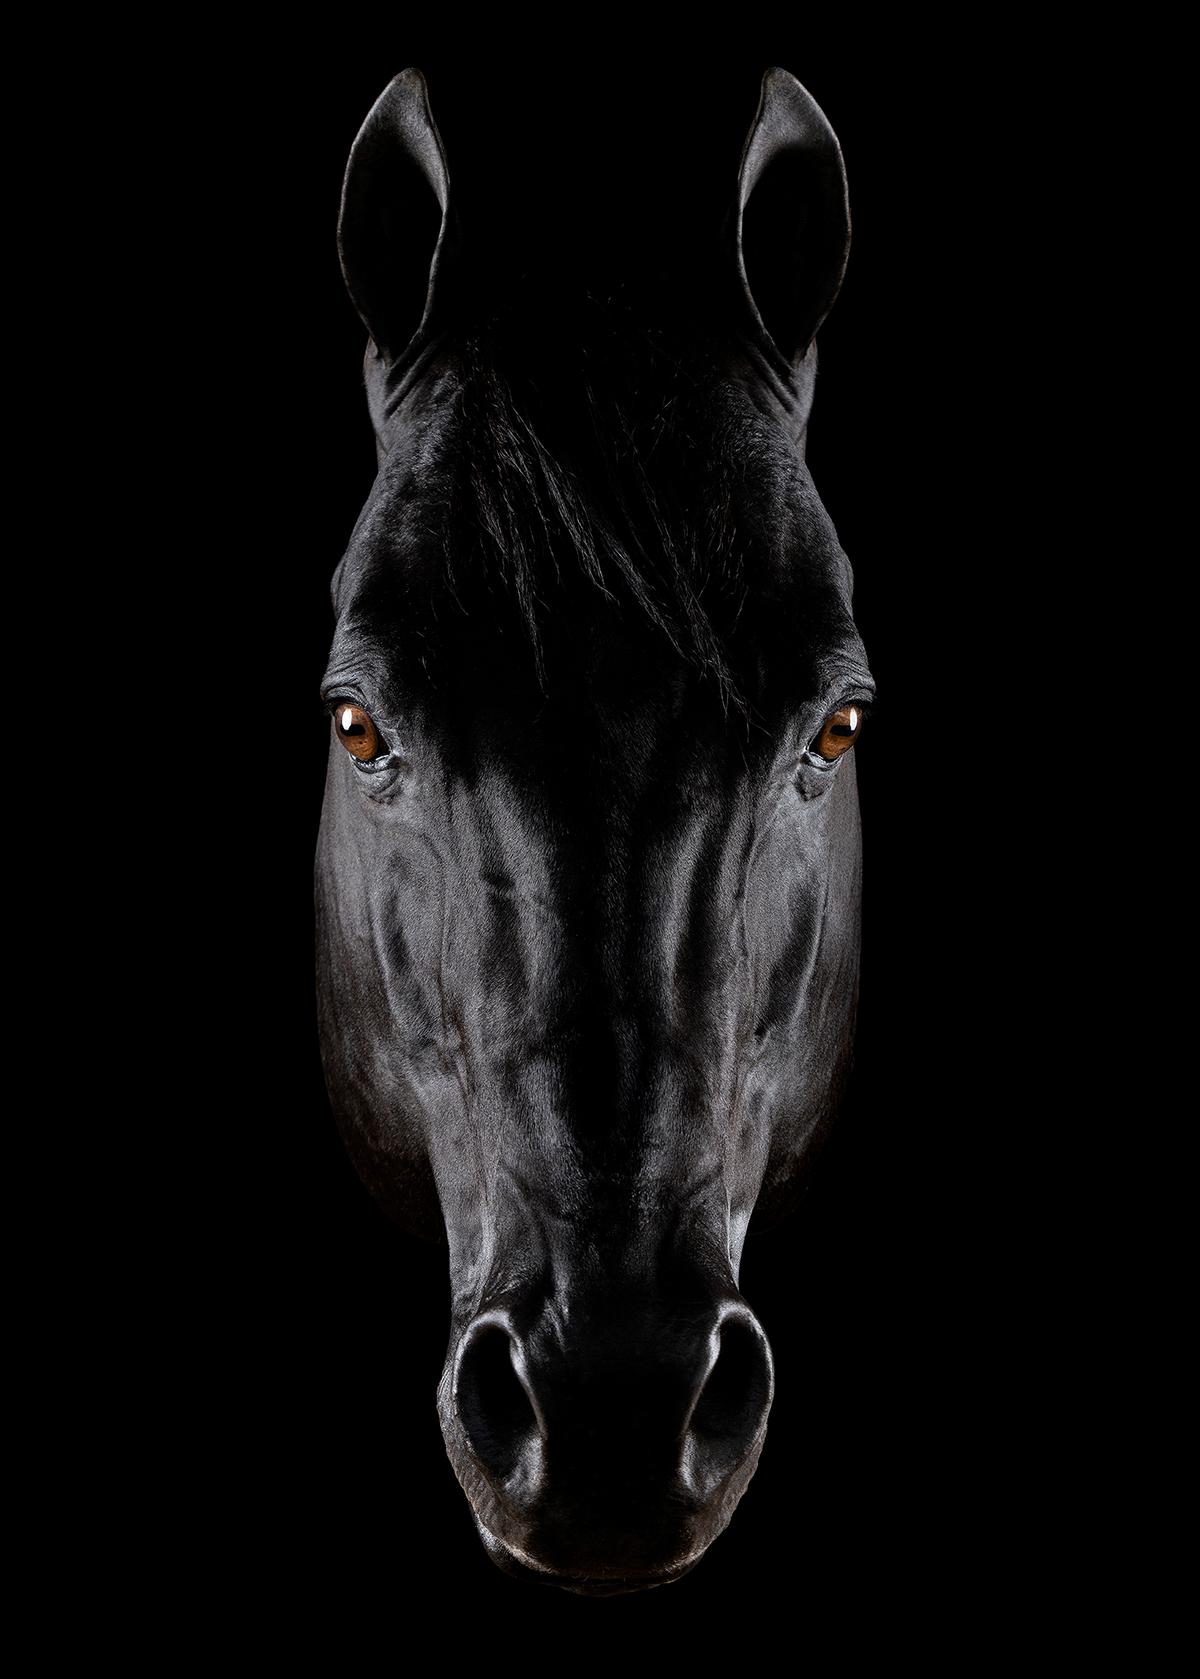 "Horse Soul": The photo has won multiple honors at the 2023 MUSE Photography Awards: Fine Art Platinum Winner and Nature Gold Winner. (Courtesy of <a href="https://www.instagram.com/tonymendesphotography/">Tony Mendes</a>)